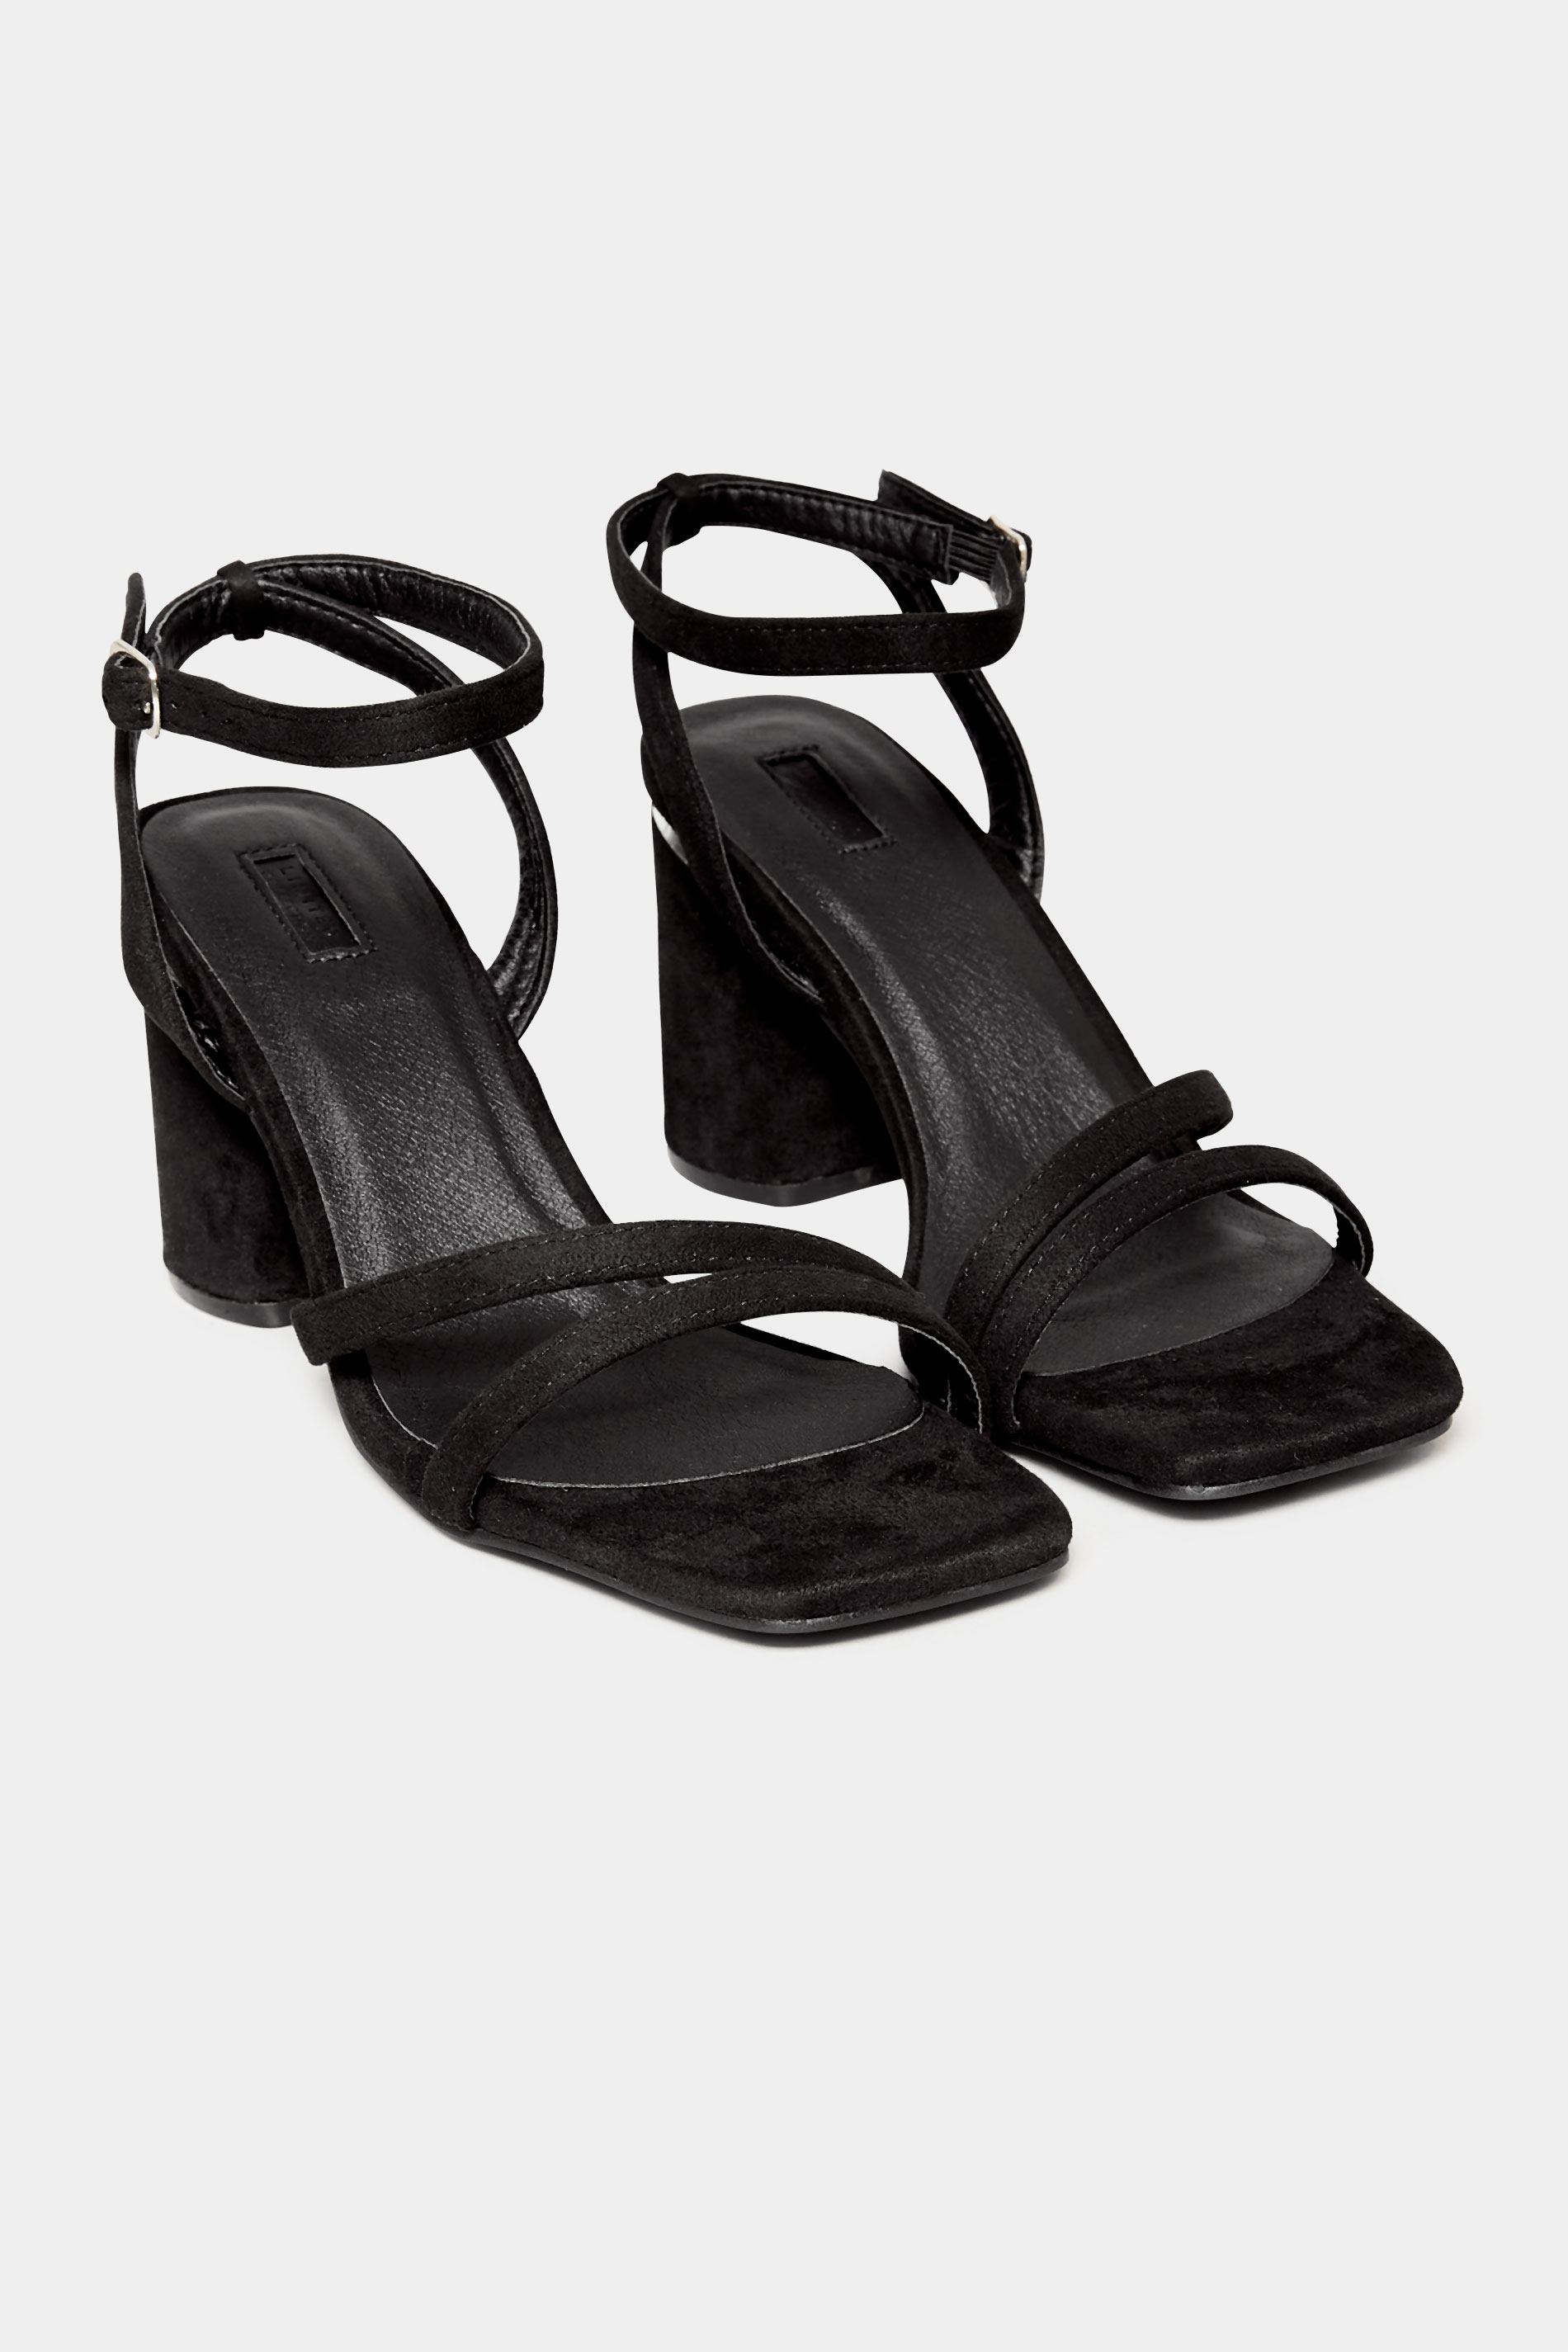 LIMITED COLLECTION Black Asymmetrical Block Heel Sandal In Wide E Fit & Extra Fit EEE Fit 1